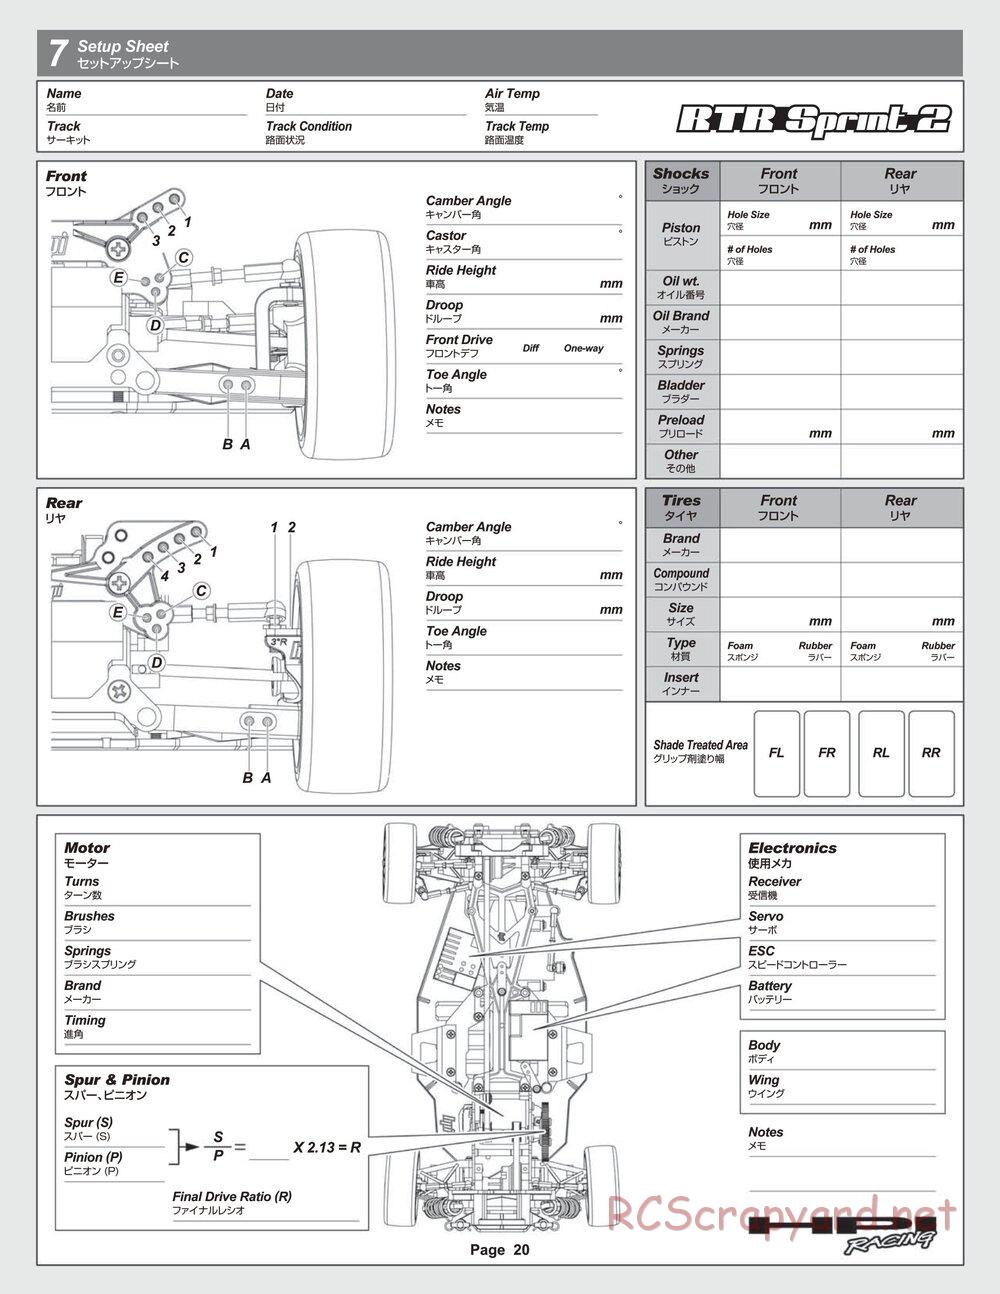 HPI - Sprint 2 RTR - Manual - Page 20